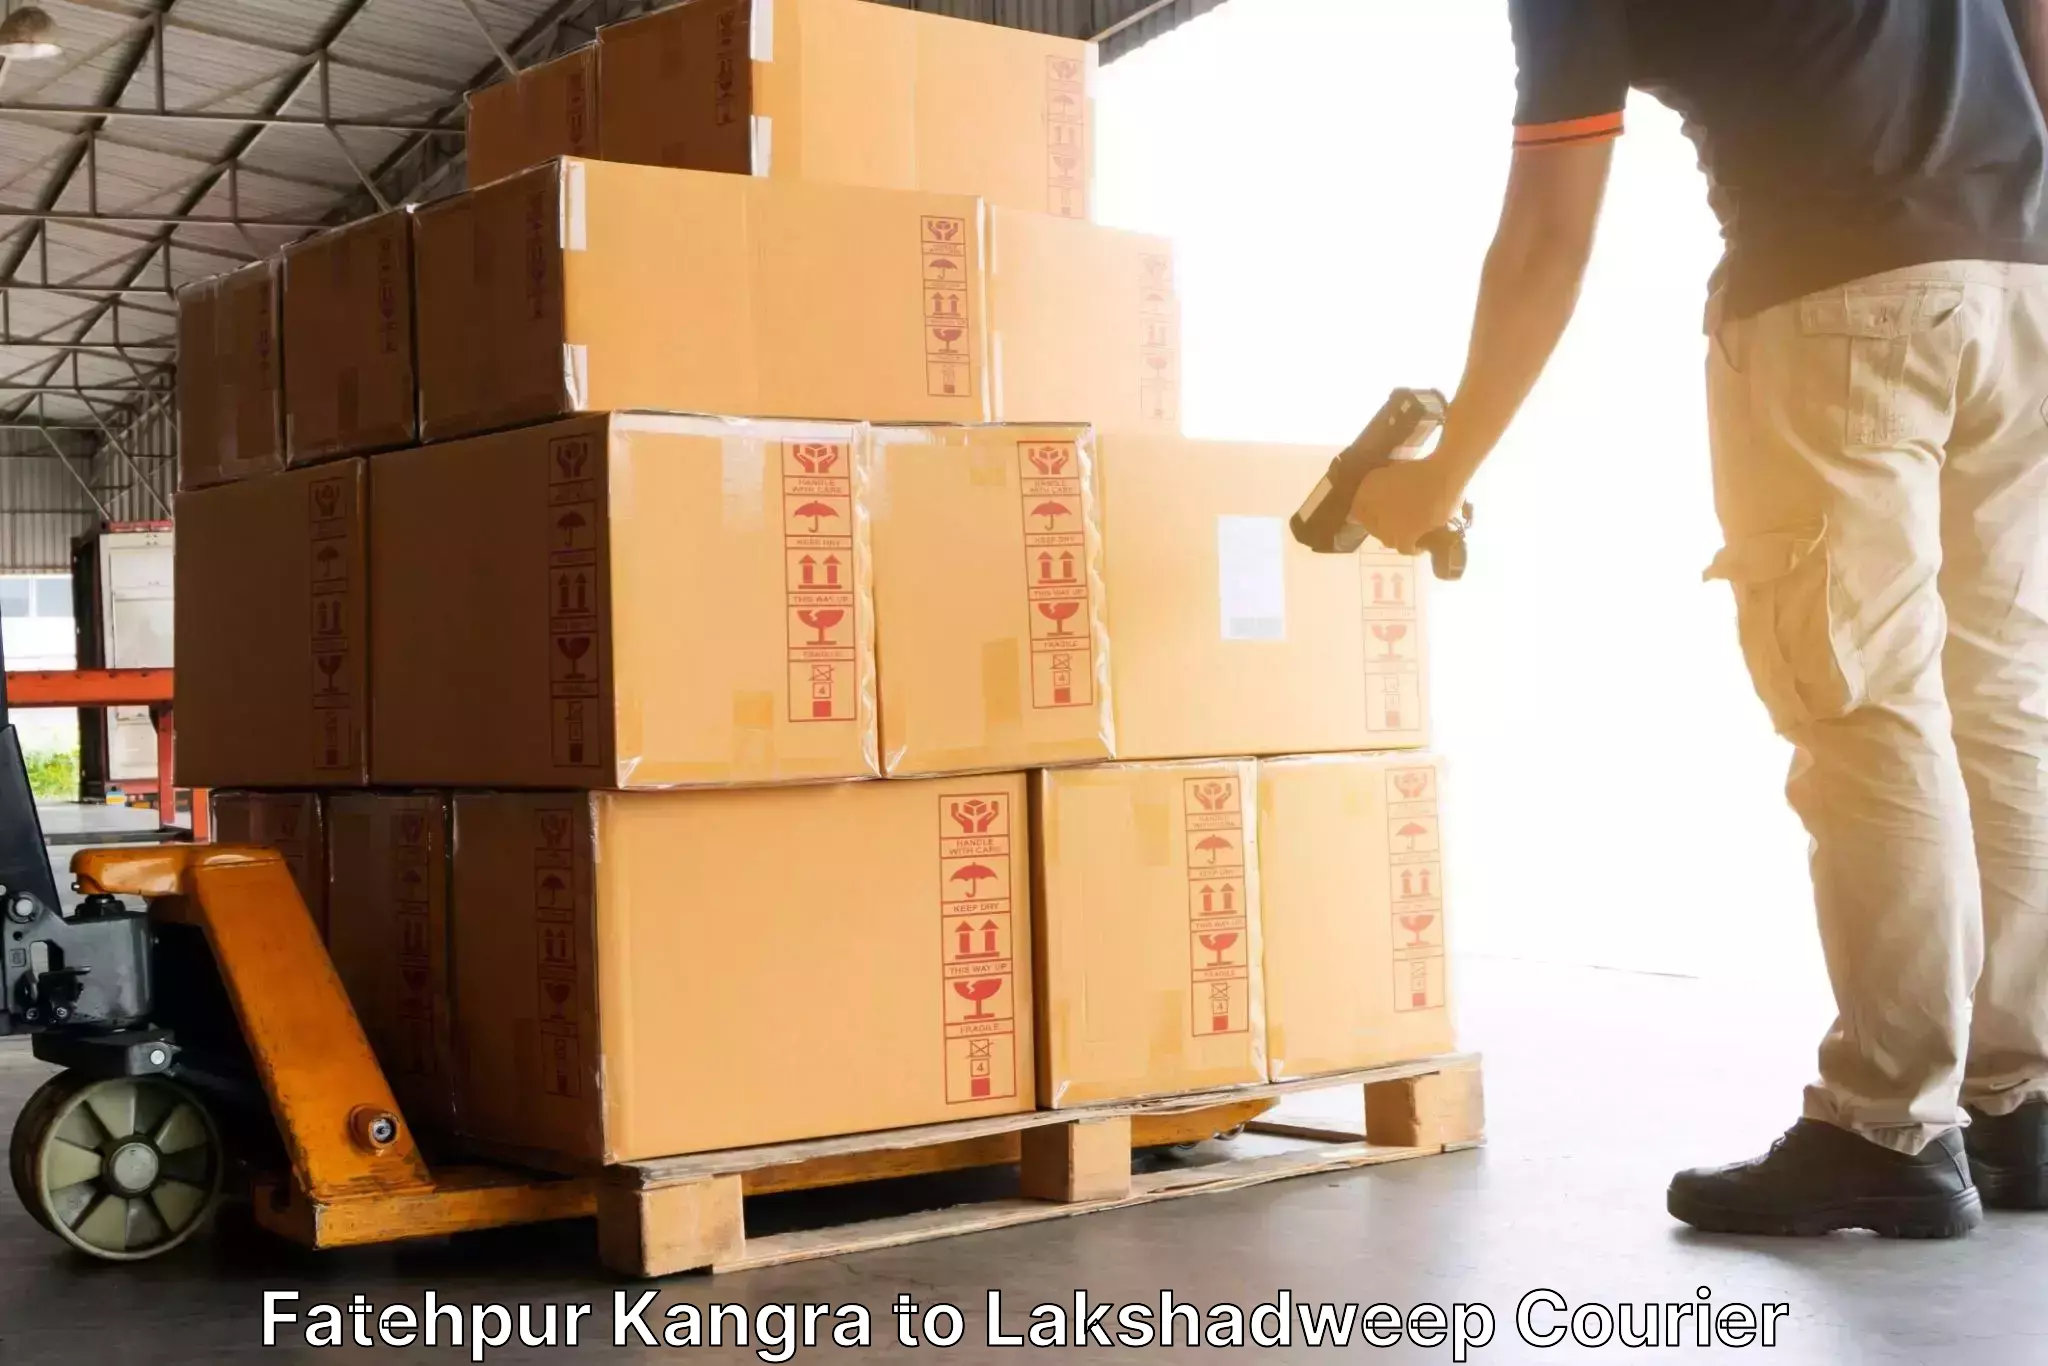 Multi-service courier options in Fatehpur Kangra to Lakshadweep